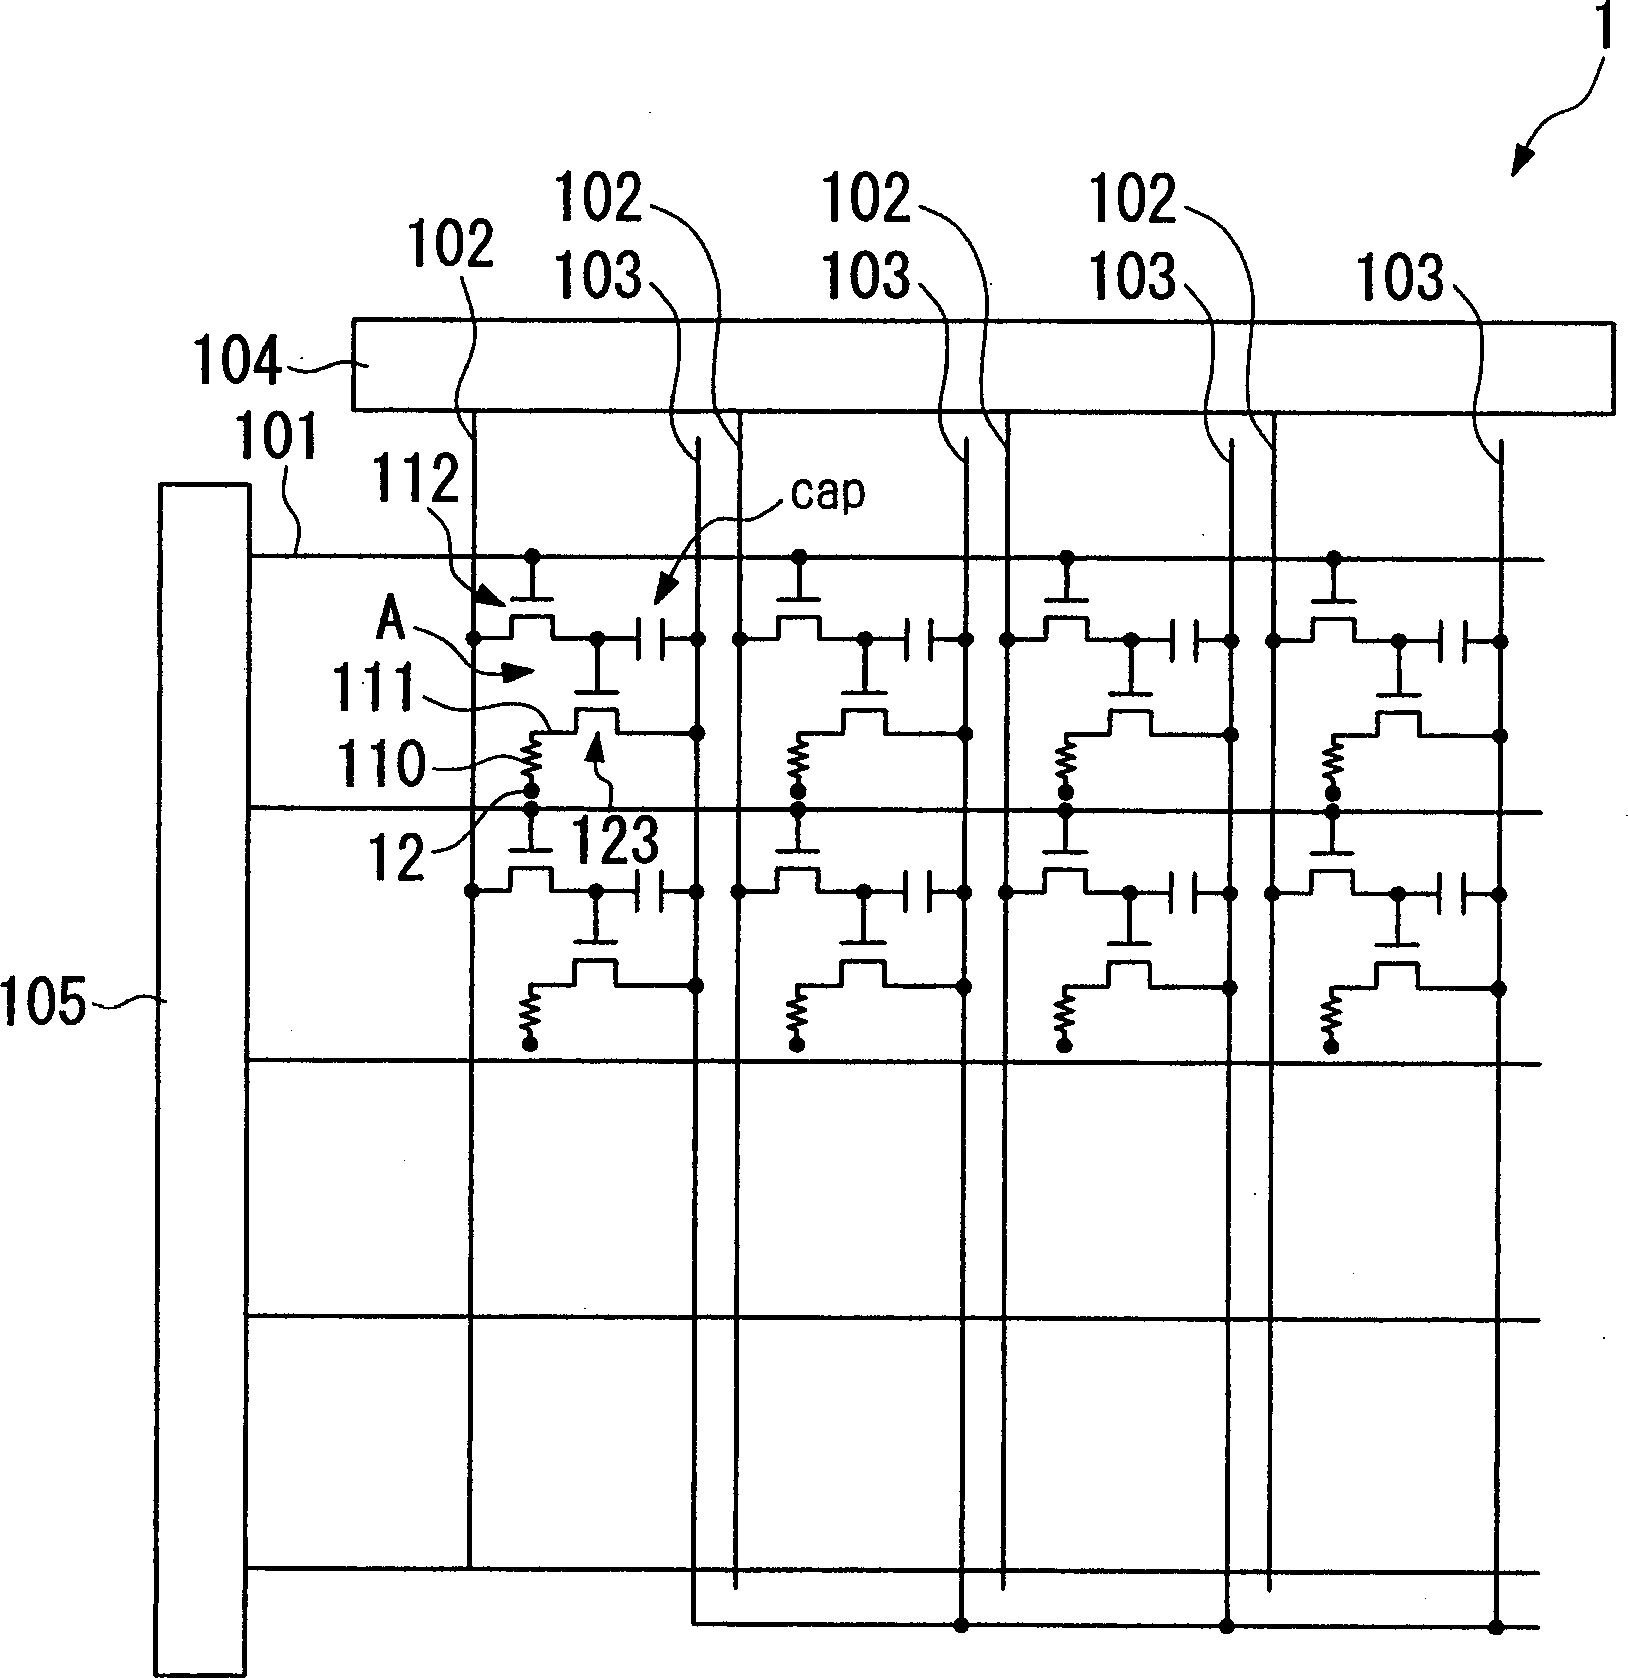 Display device, electronic apparatus and method for mfg. display device